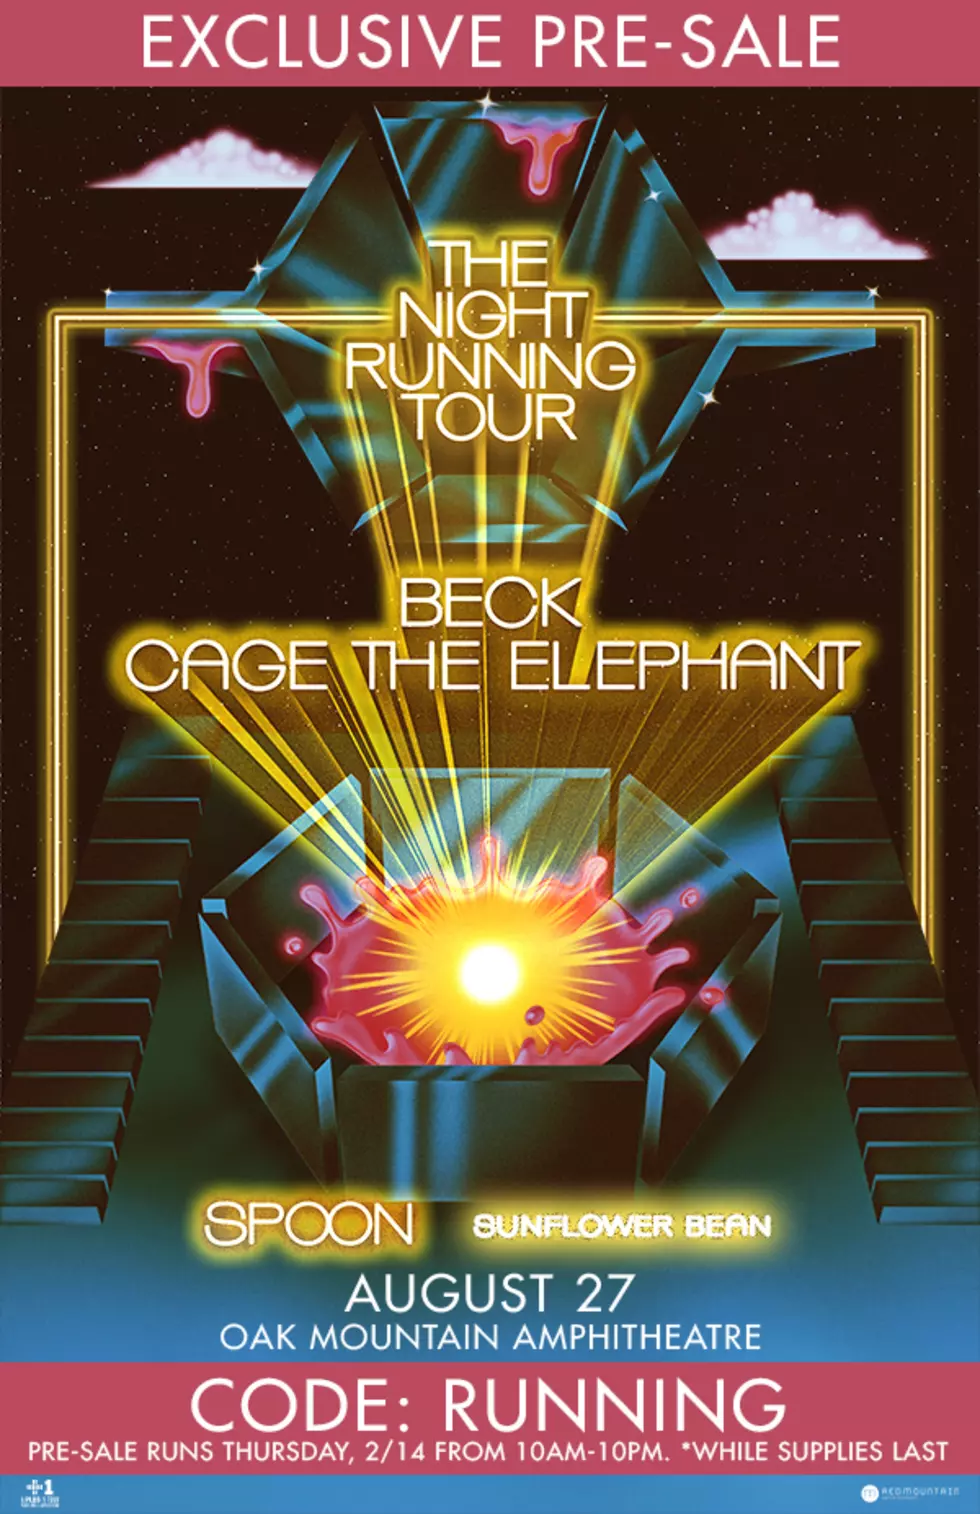 We have Presale Tickets for Beck and Cage The Elephant!